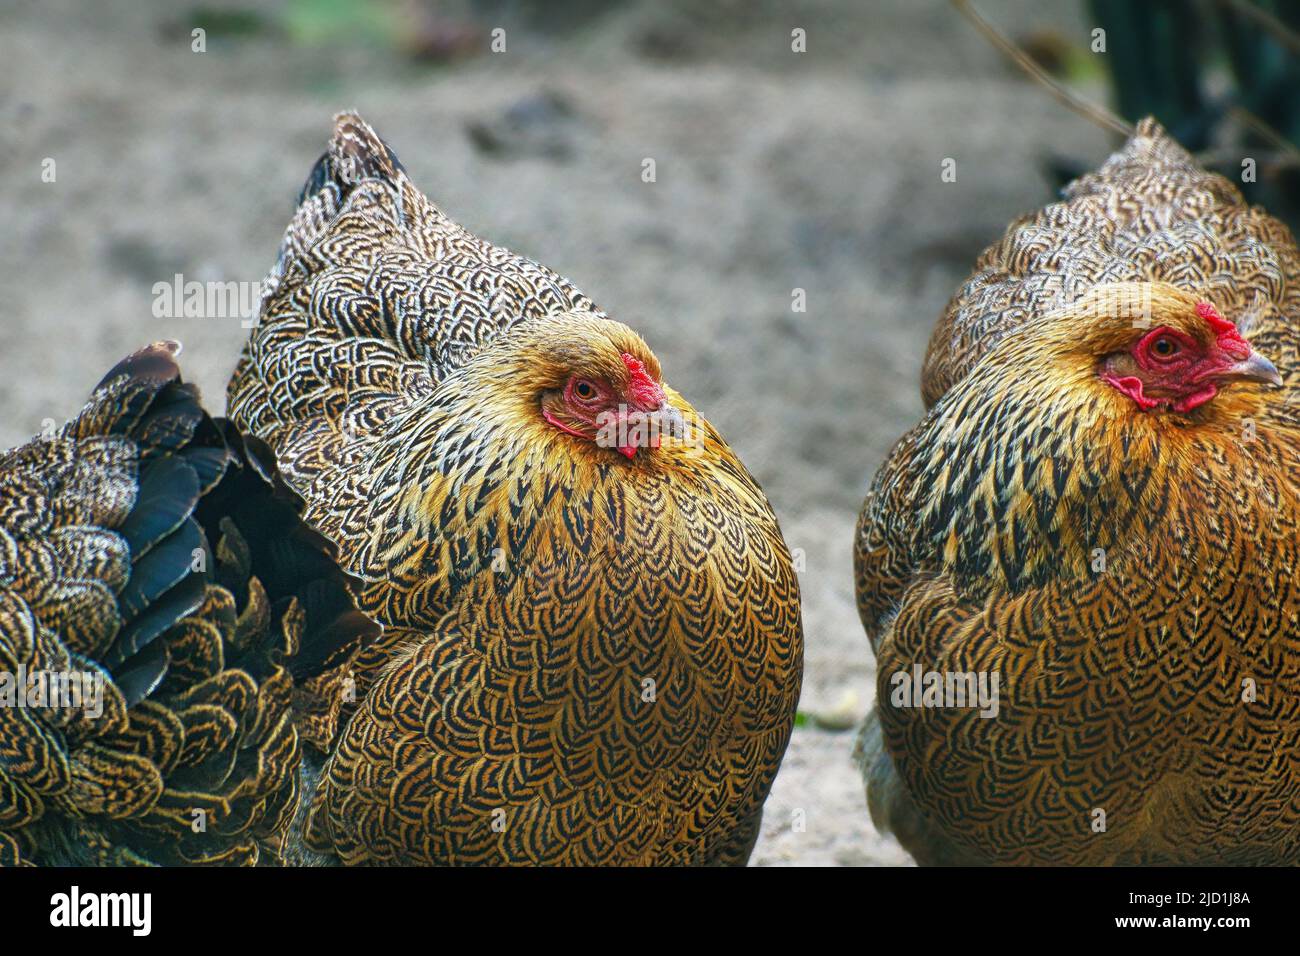 Hen on a farm looking for food. The free-living birds scratching on the ground. Animal photo of a bird Stock Photo